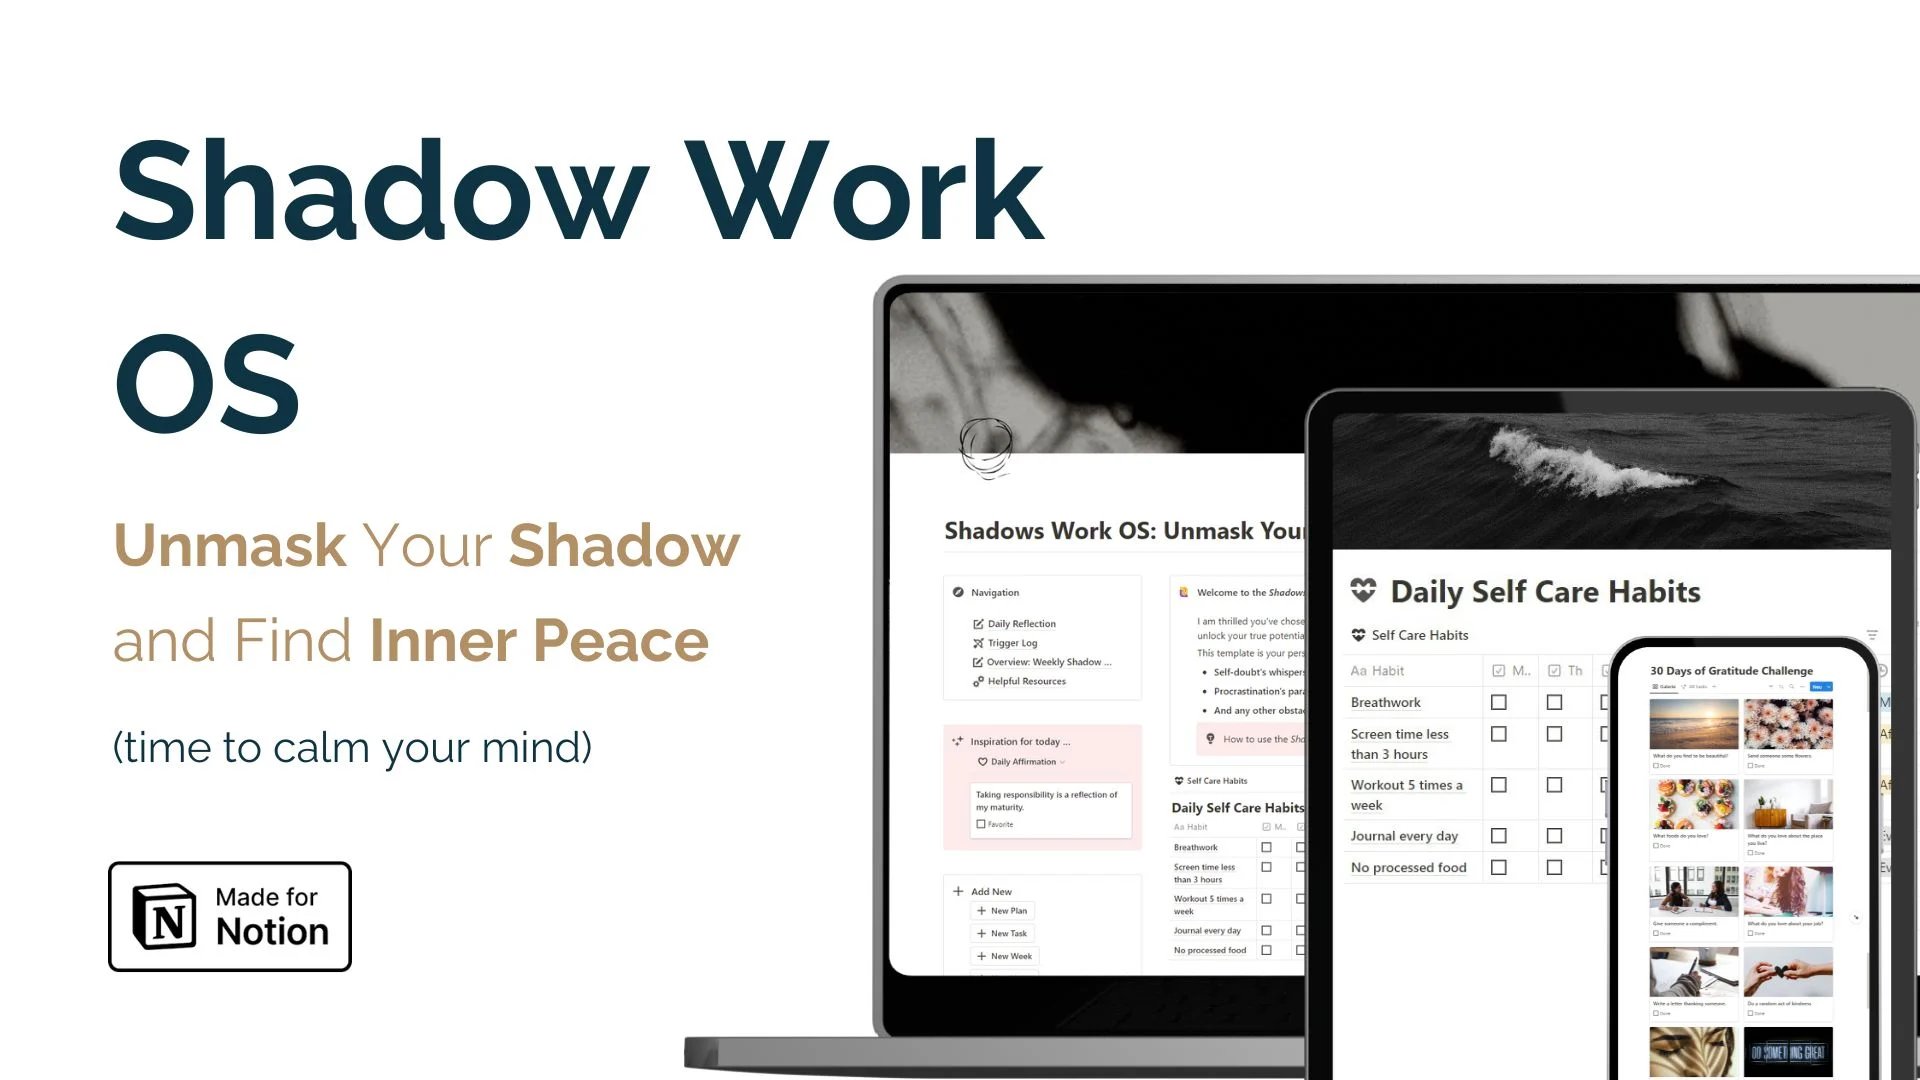 All-in-one Notion Operating System to Silence Your Doubts and Break Free From Old Patterns. The Shadow Work OS is designed to help you ignite your communication skills, speak up and building stronger connections.